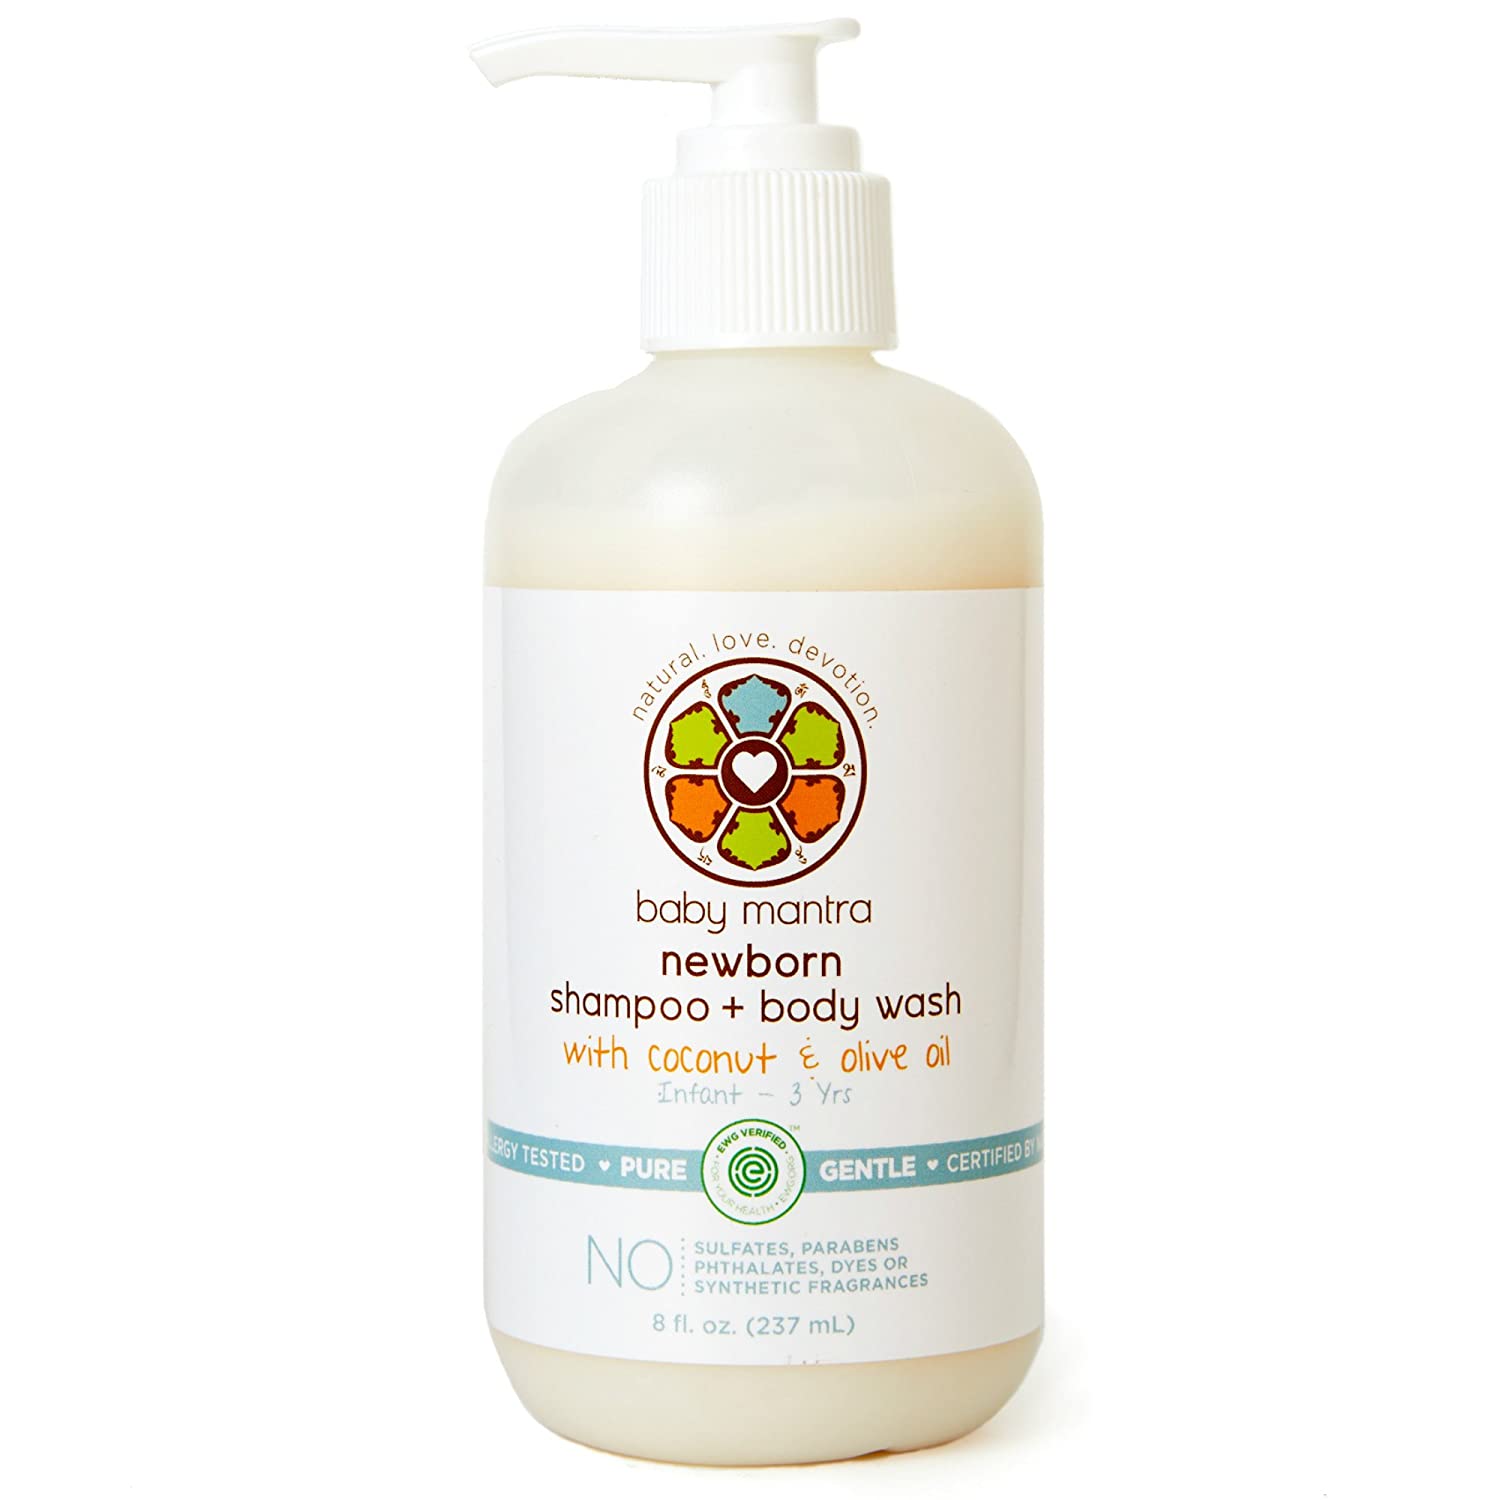 Top 13 Best Organic Baby Washes 2022 - Review & Buying Guide 8